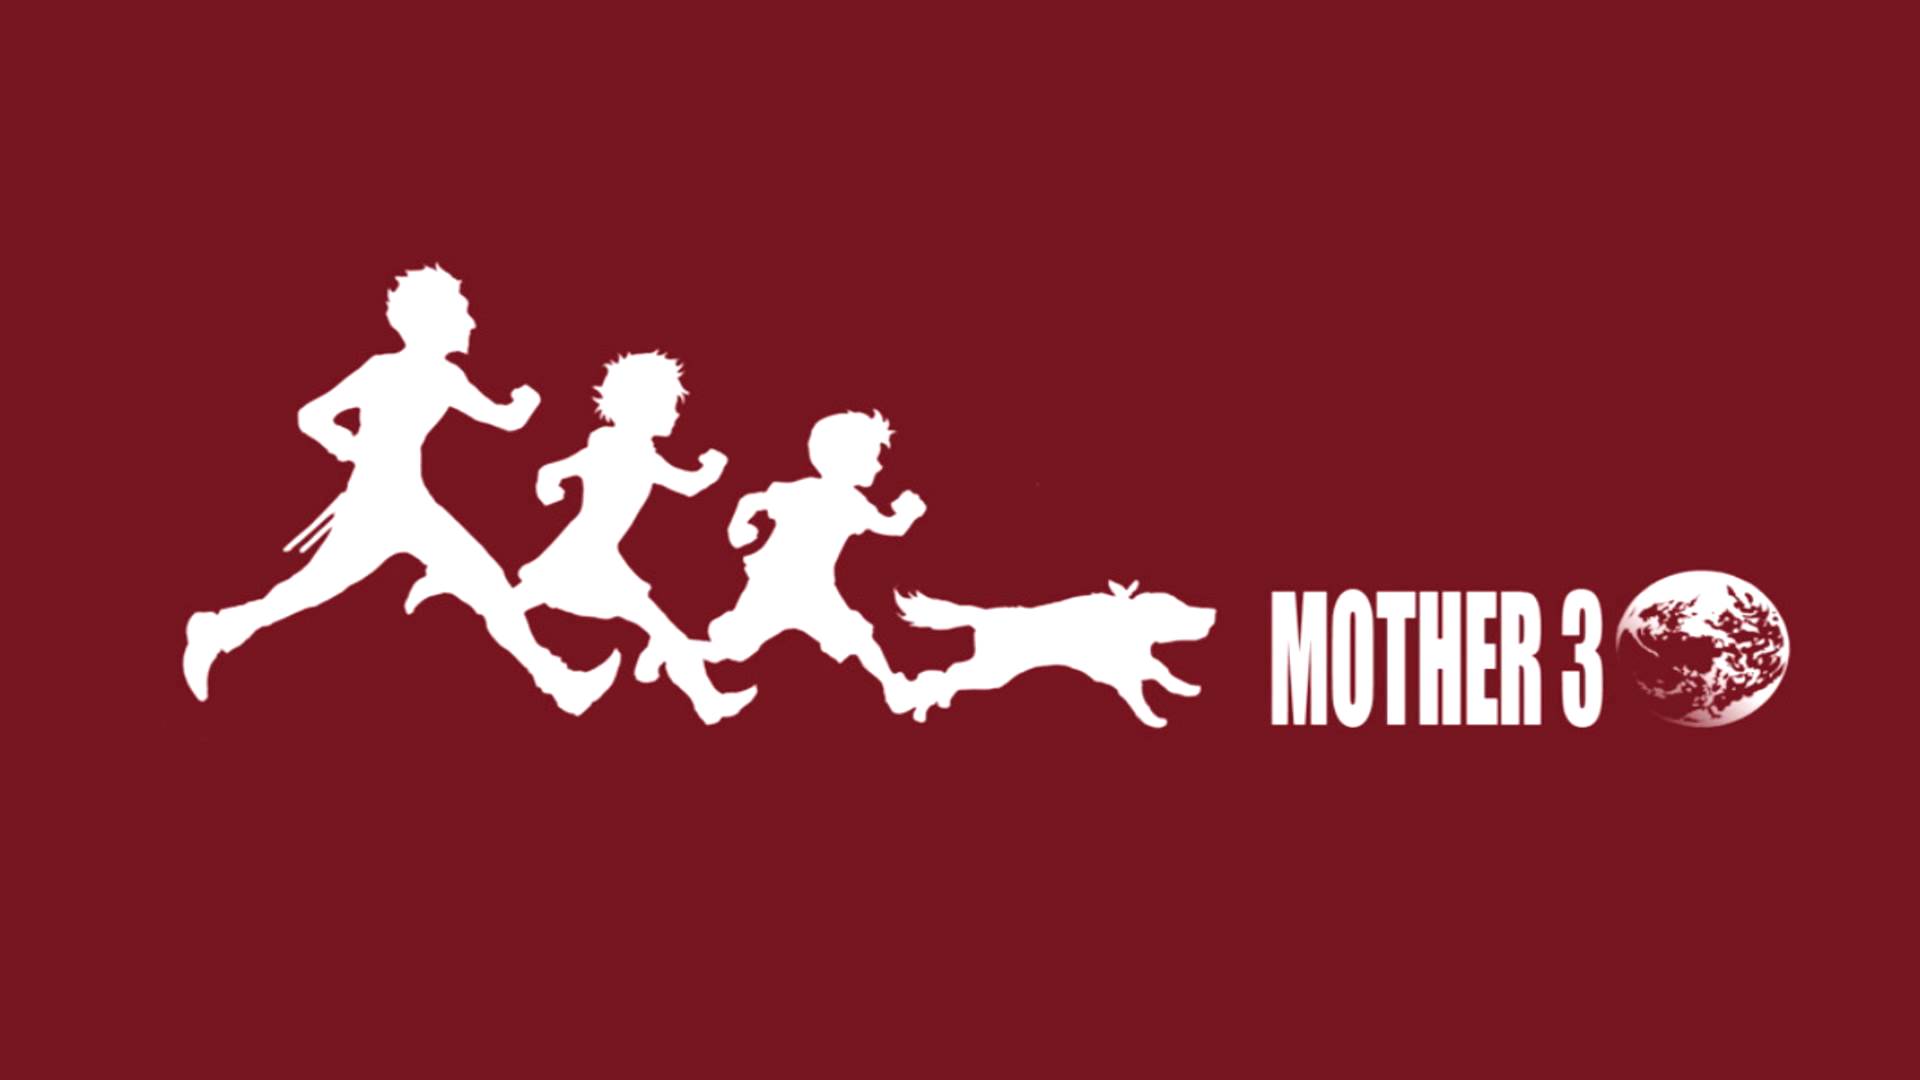 HD Free Photo Mother 3 Game